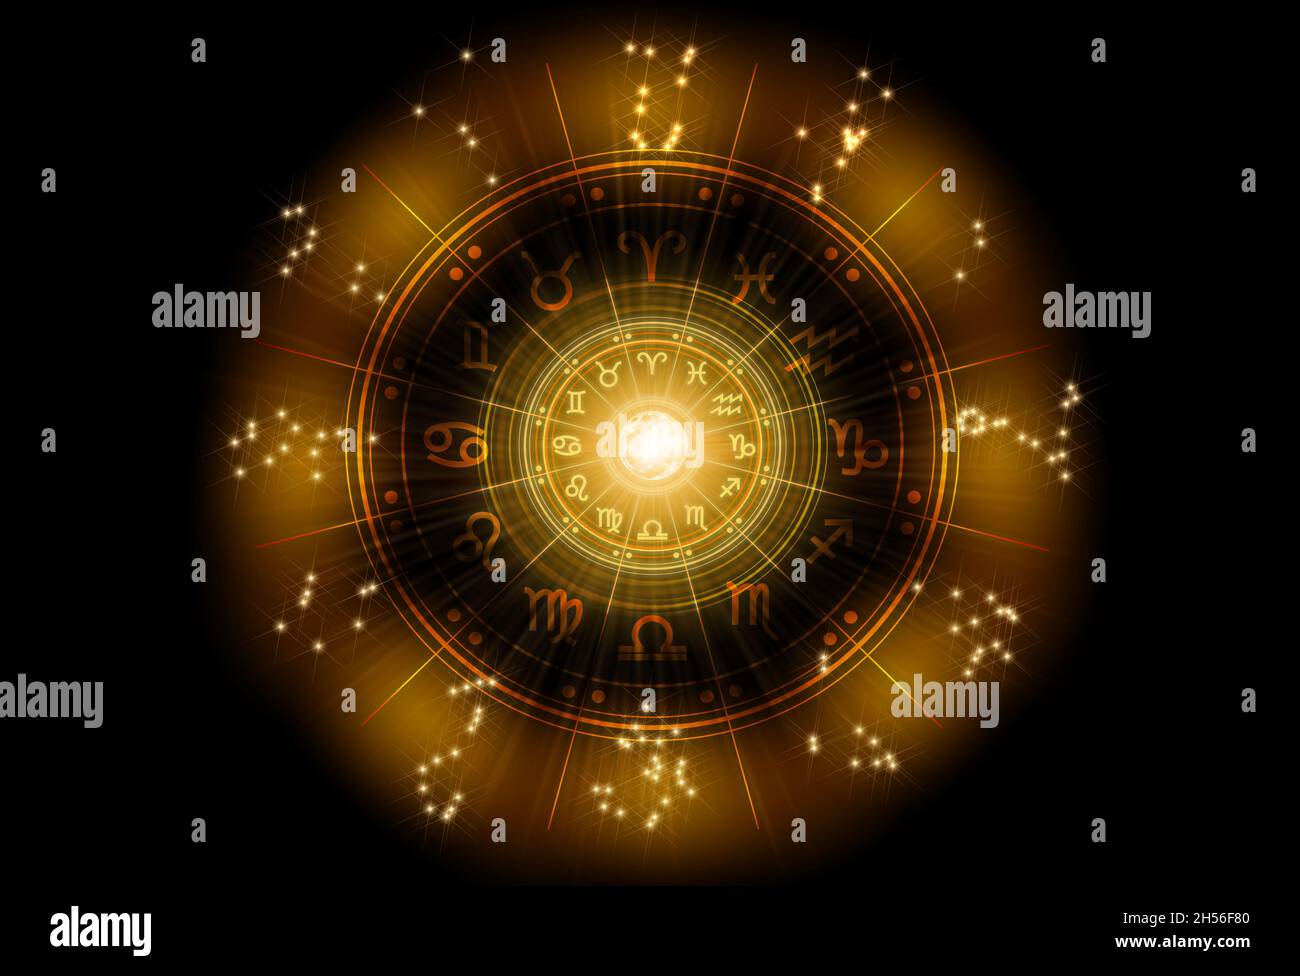 Zodiac signs inside of horoscope circle. Astrology in the sky with many stars and moons astrology and horoscopes concept. Stock Photo